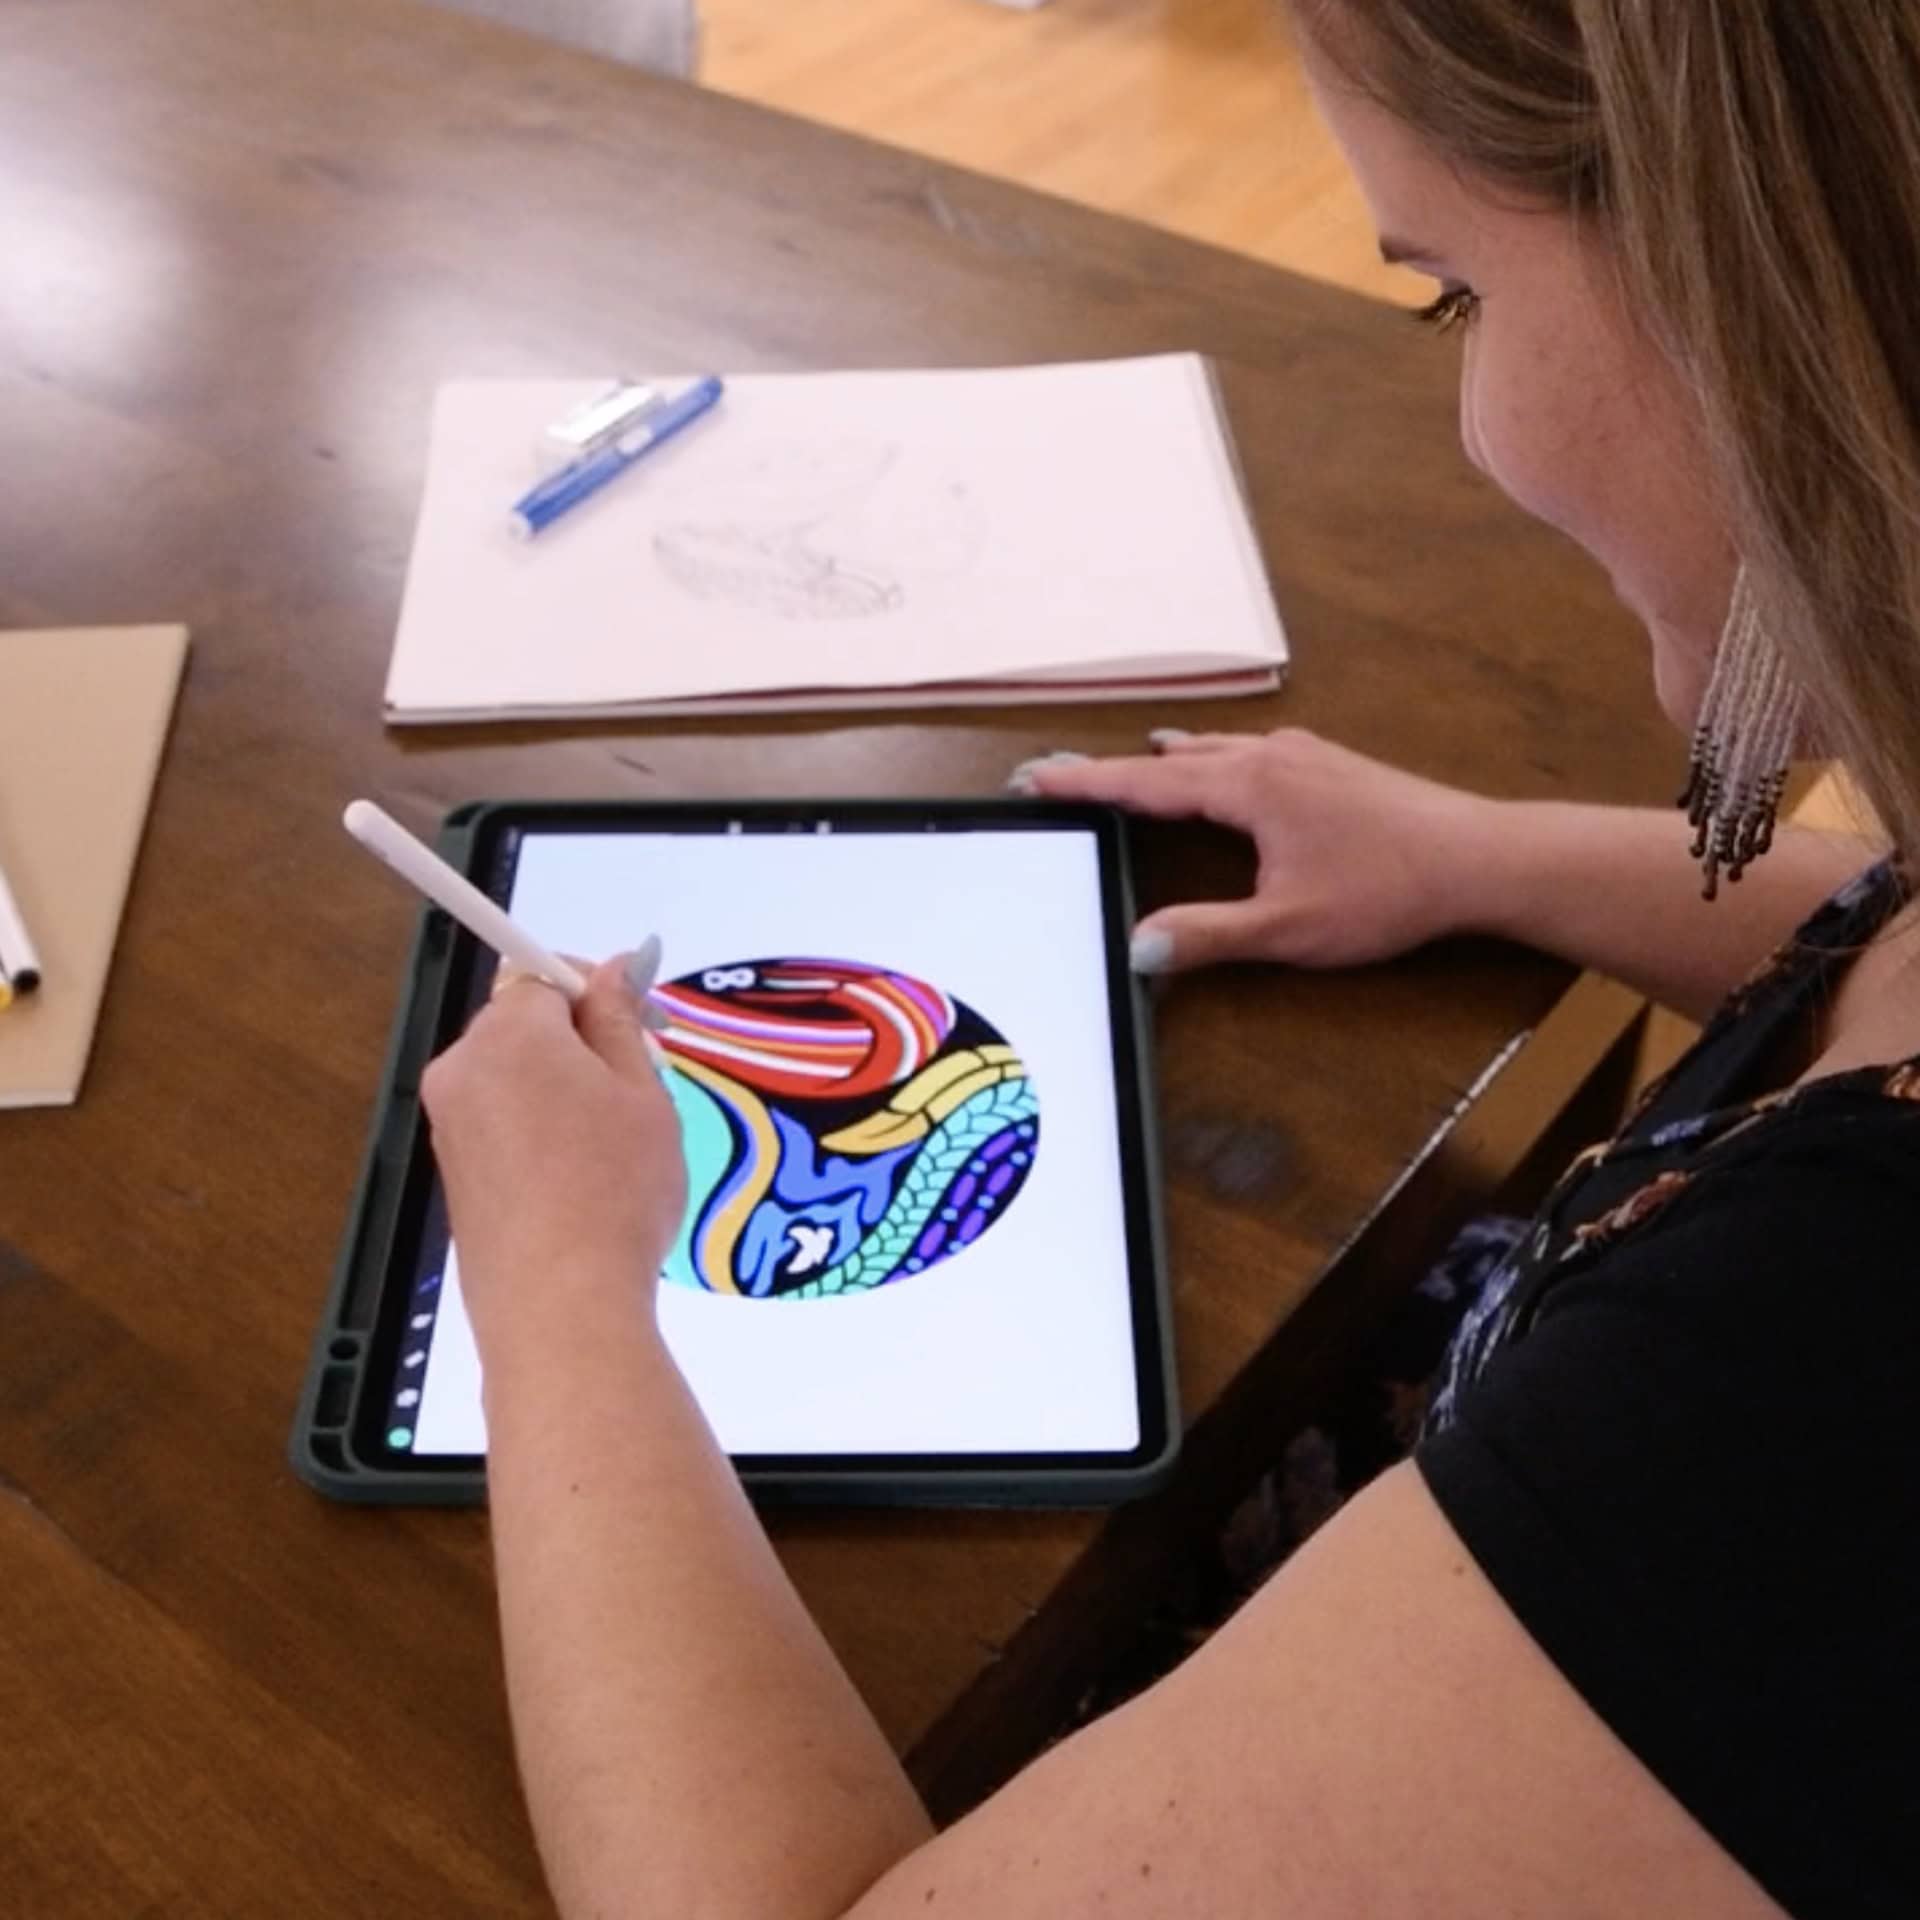 Jennica sketching CBC logo graphics on a tablet seated in the office.